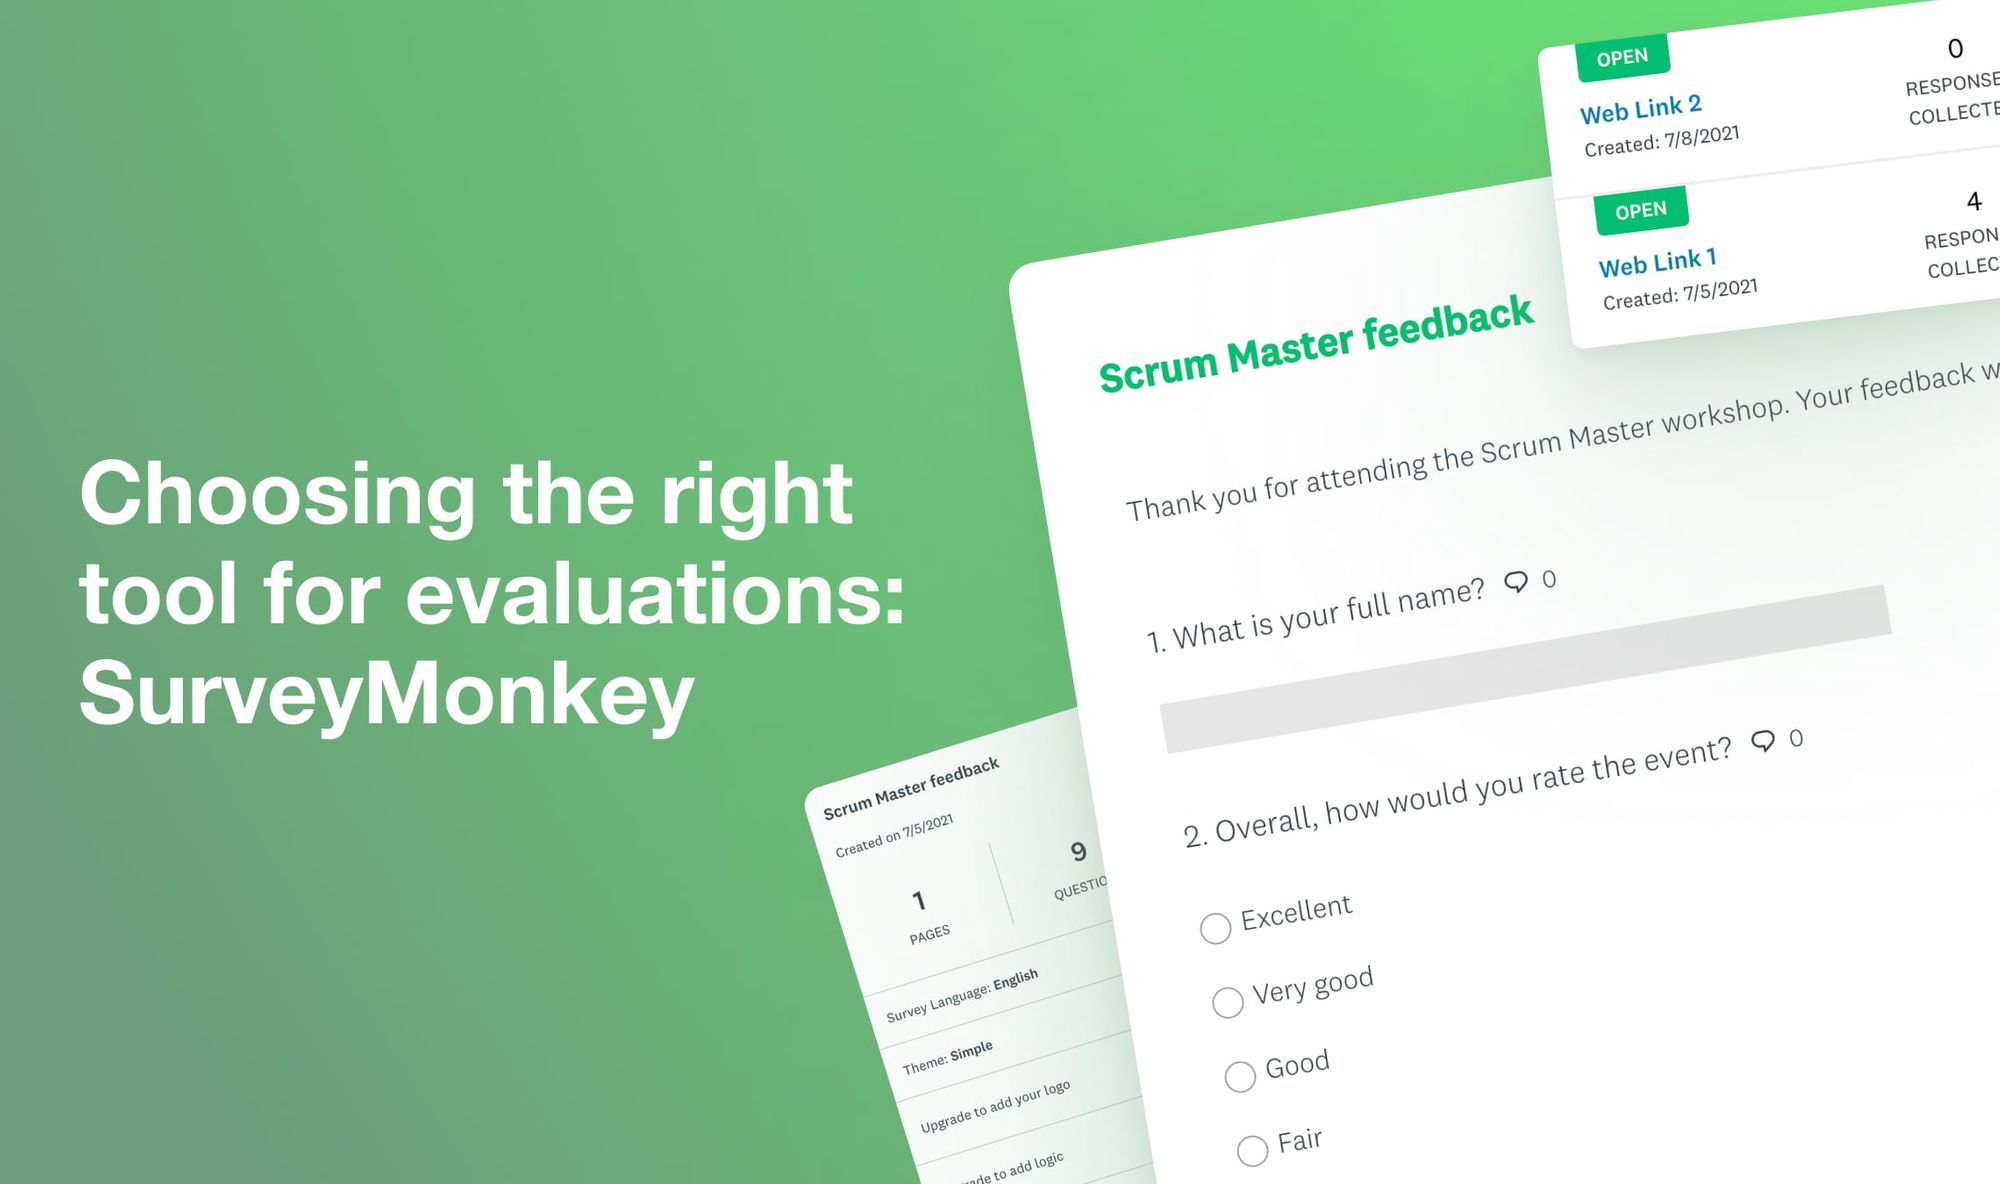 Choosing the right tool for evaluations: SurveyMonkey